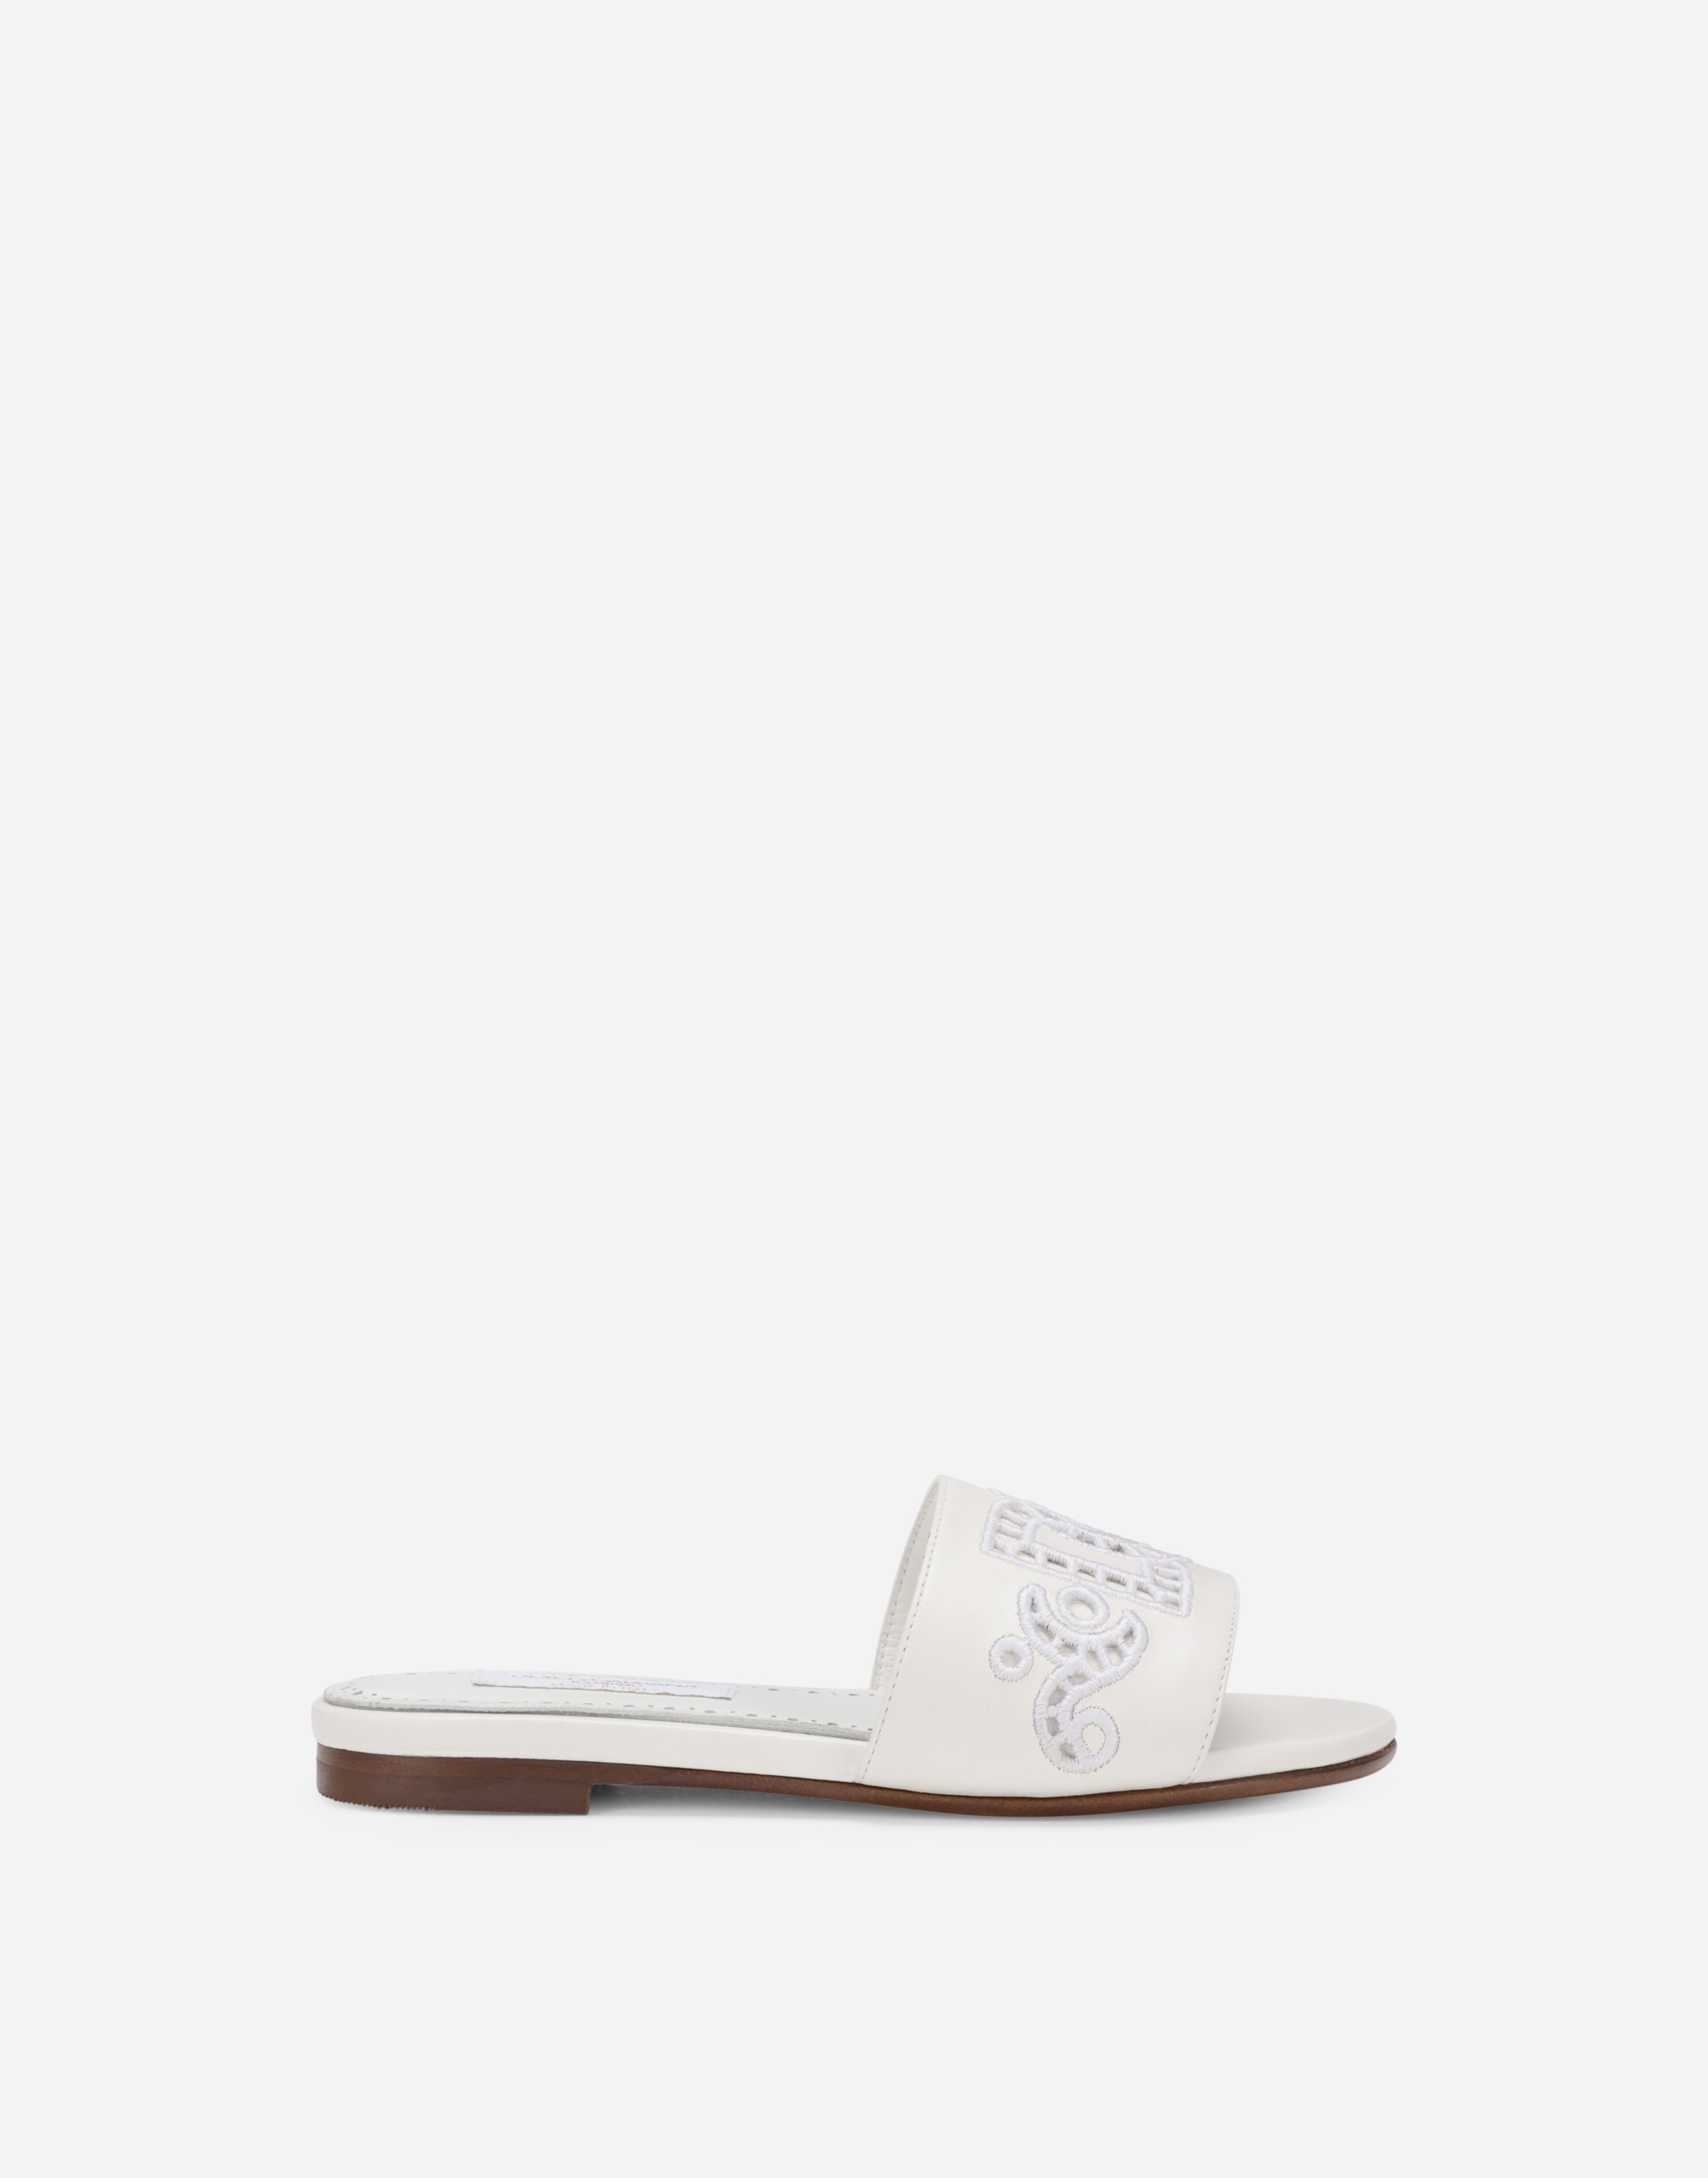 Leather DG Millennials sliders with intarsia in White